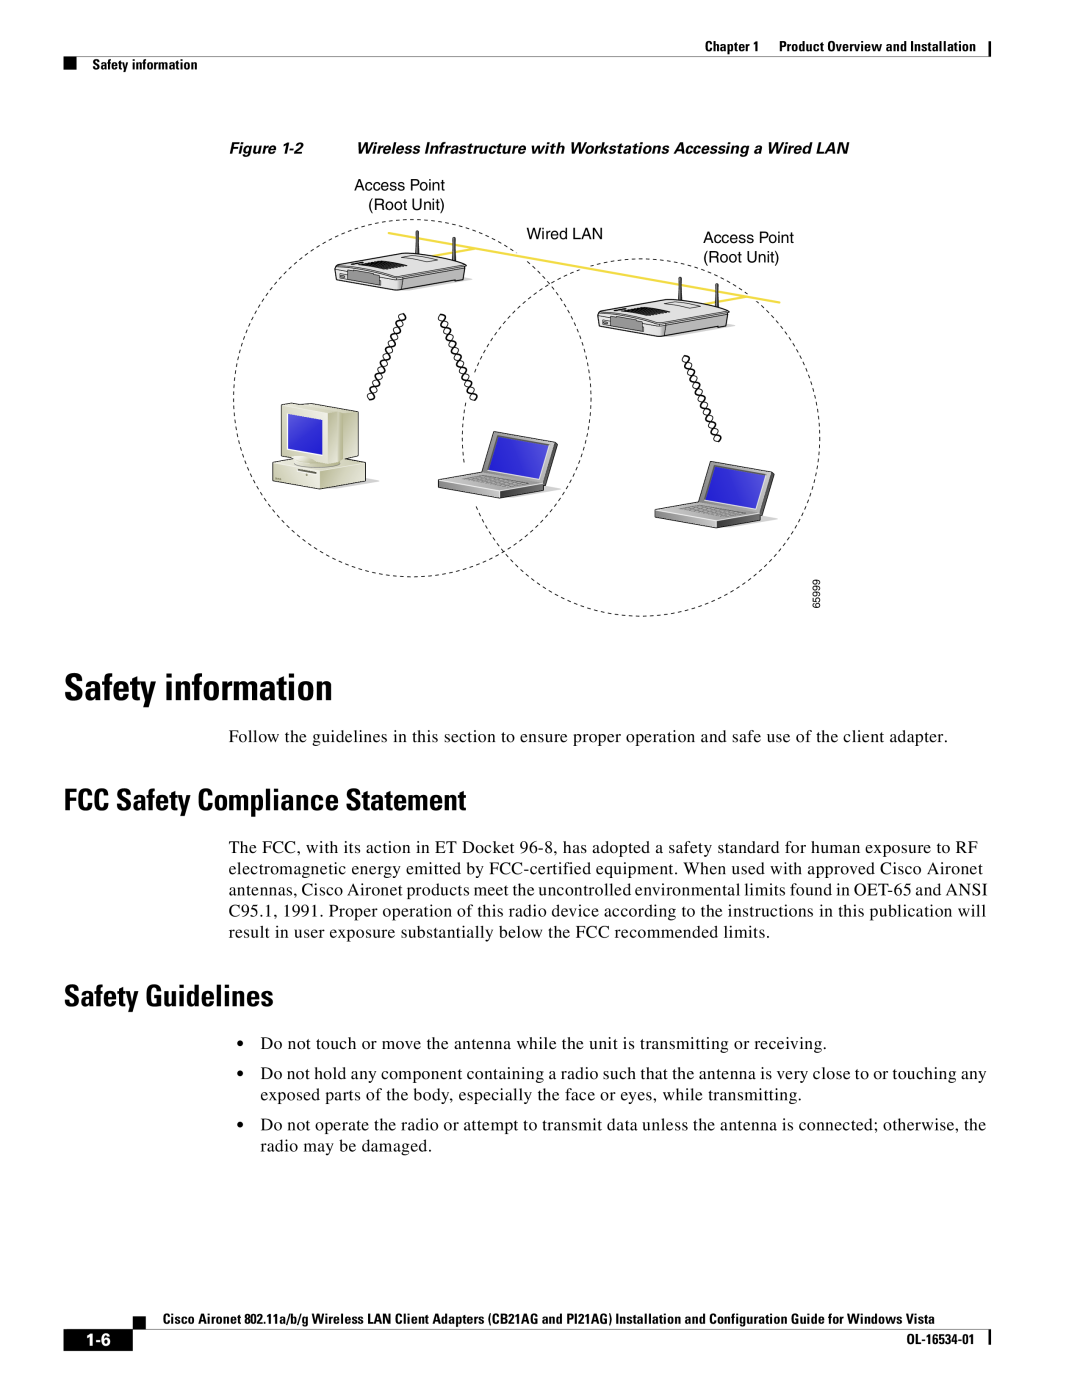 Cisco Systems PI21AG, CB21AG manual Safety information, FCC Safety Compliance Statement, Safety Guidelines 